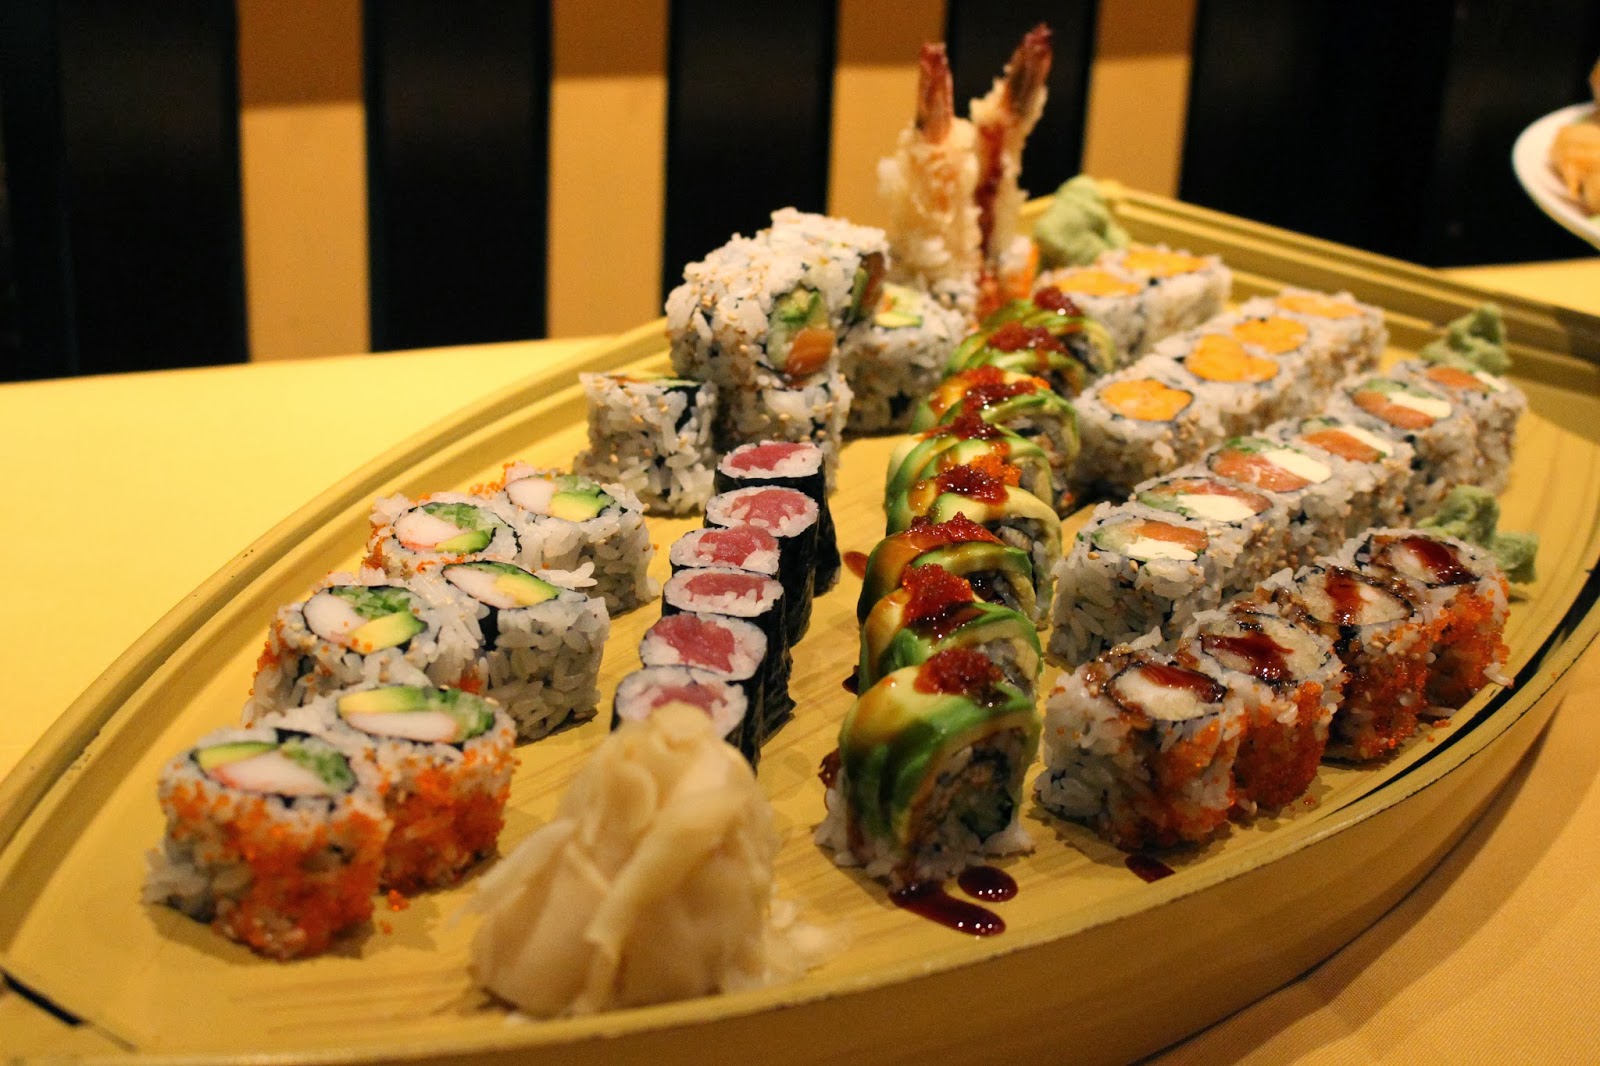 Bamboo Sushi - Let's take a #BambooDeepDive into one of our new